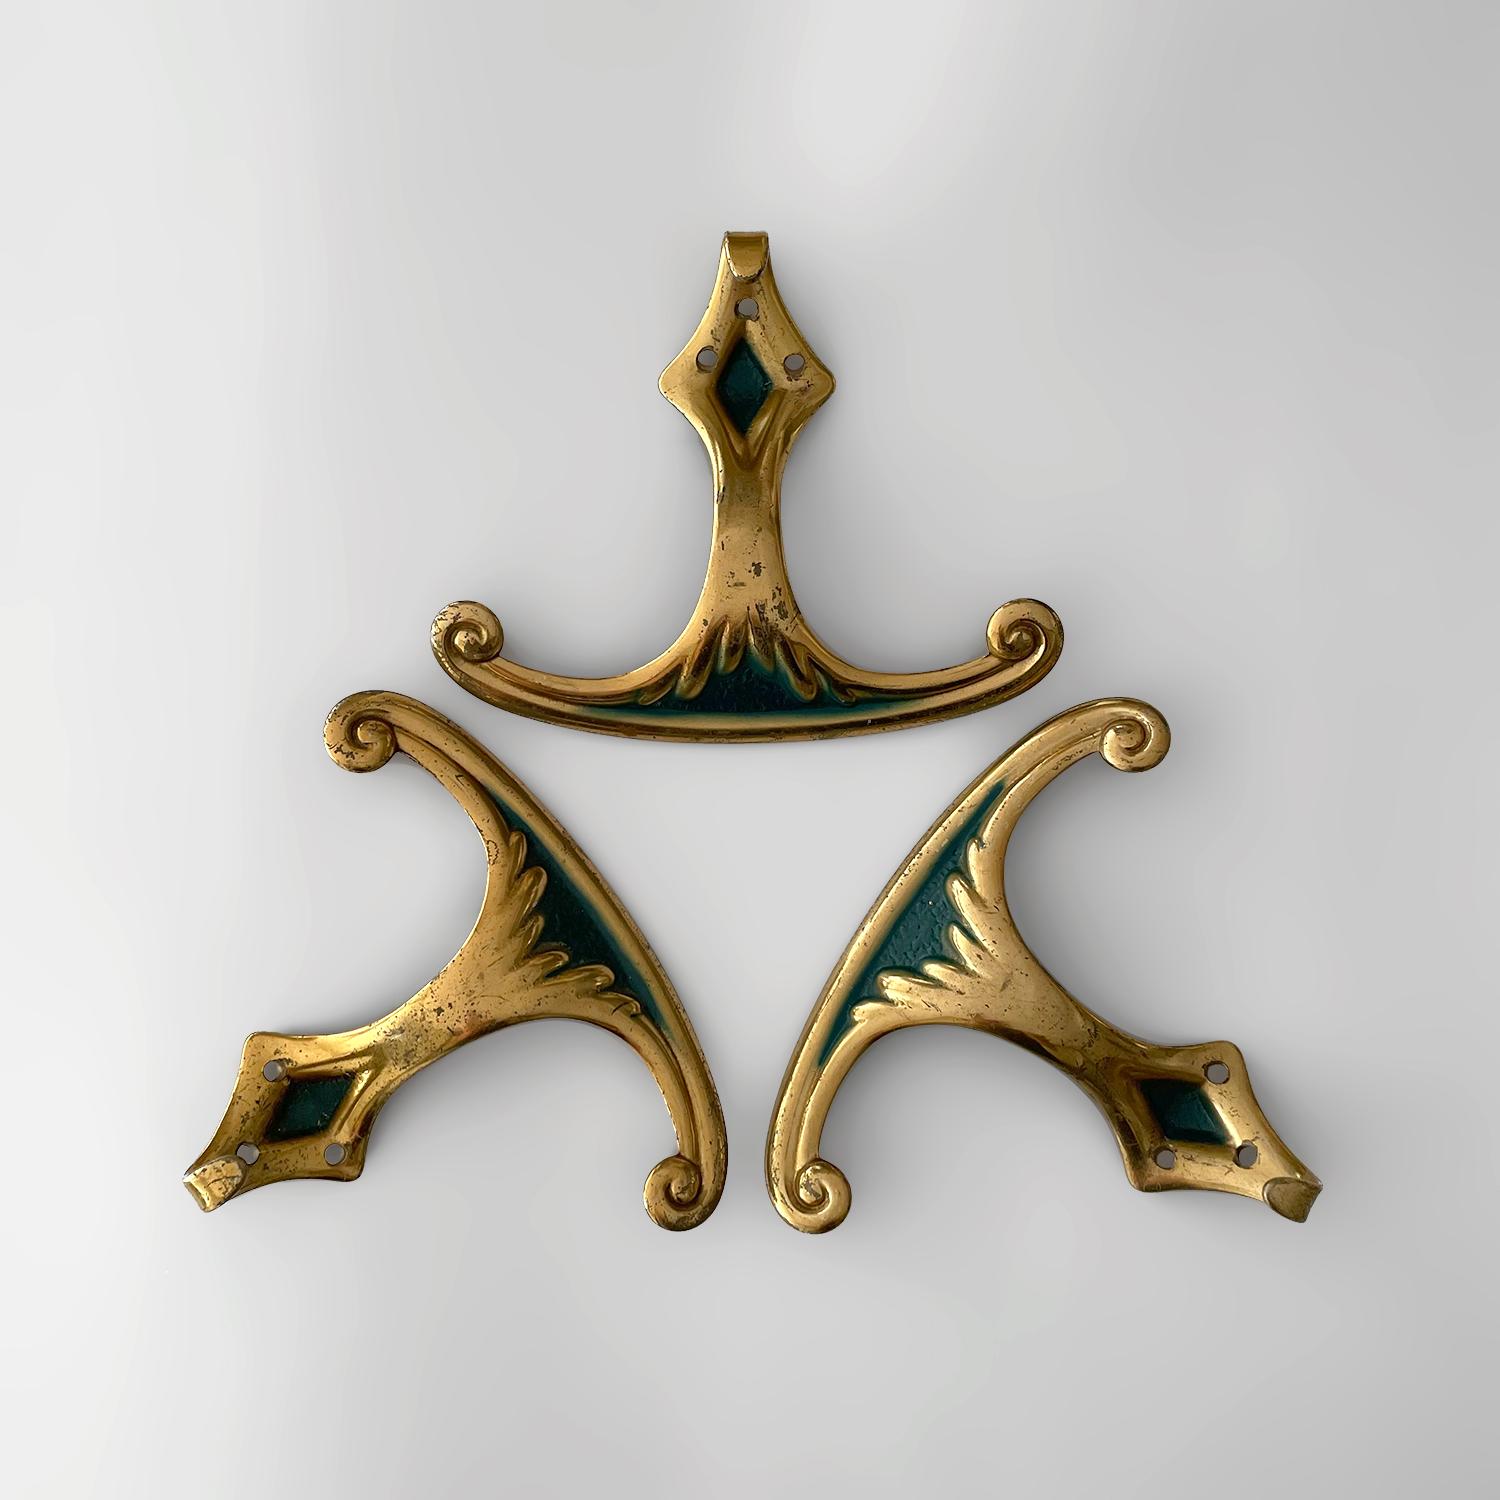 Italian aged brass wall hooks
Italy, circa 1950s
Each hook provides plenty of storage with an upper arched wide panel hook and a lower j hook
Rich dark green accents are perfectly contrasted against the aged brass backdrop
Metal has some loss,